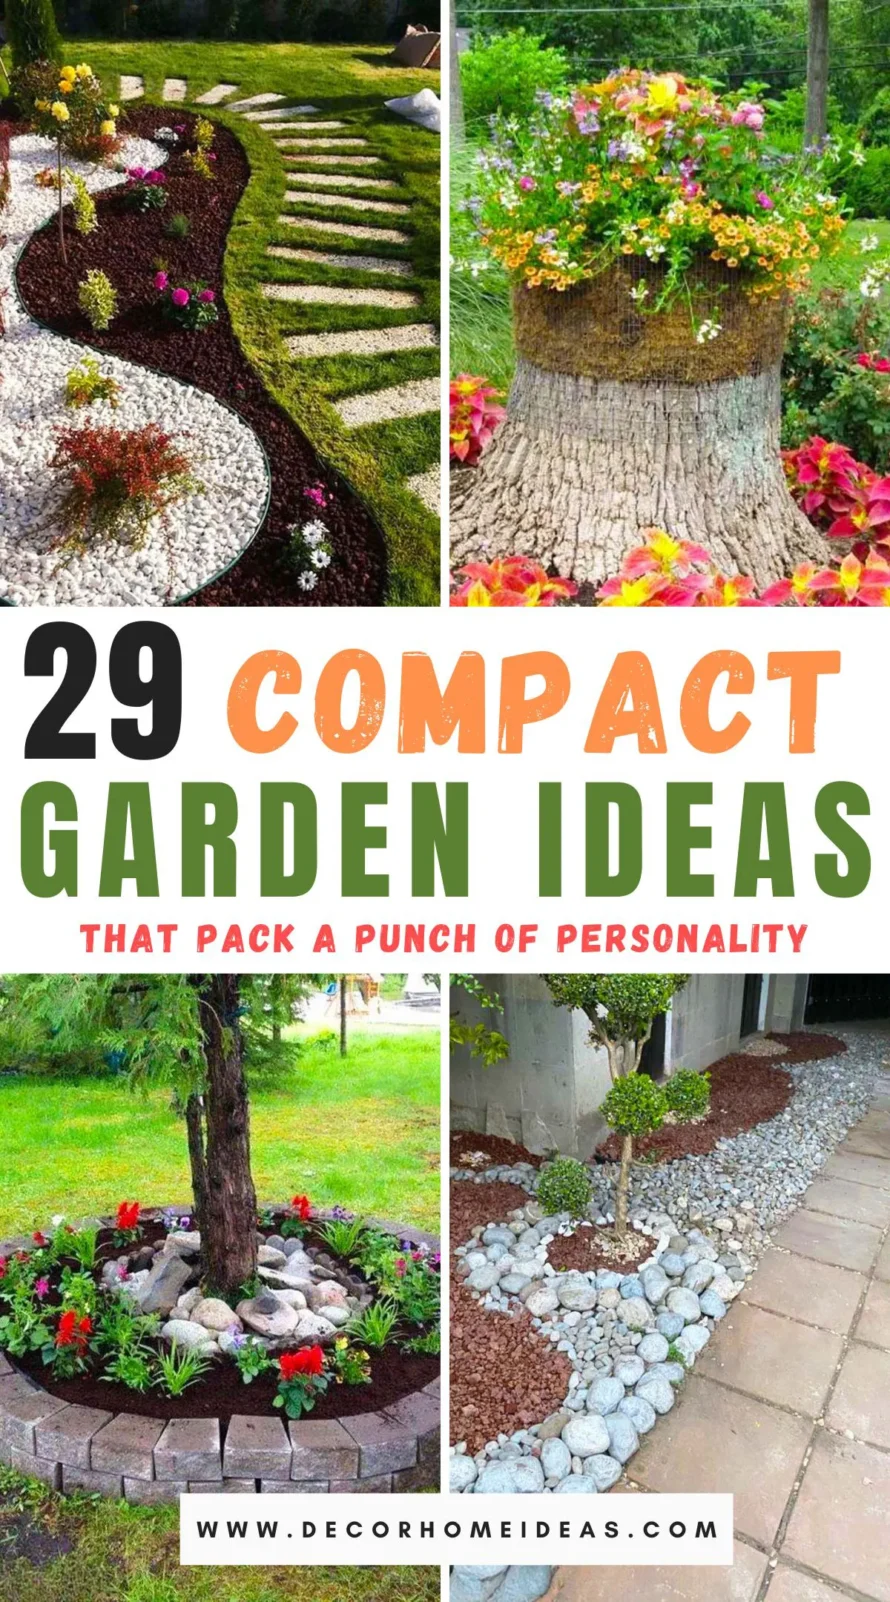 Explore 29 compact garden designs that infuse small spaces with immense personality. This post showcases how to creatively use limited square footage to create vibrant, unique outdoor areas that reflect your style. Get inspired to punch up your petite garden today!